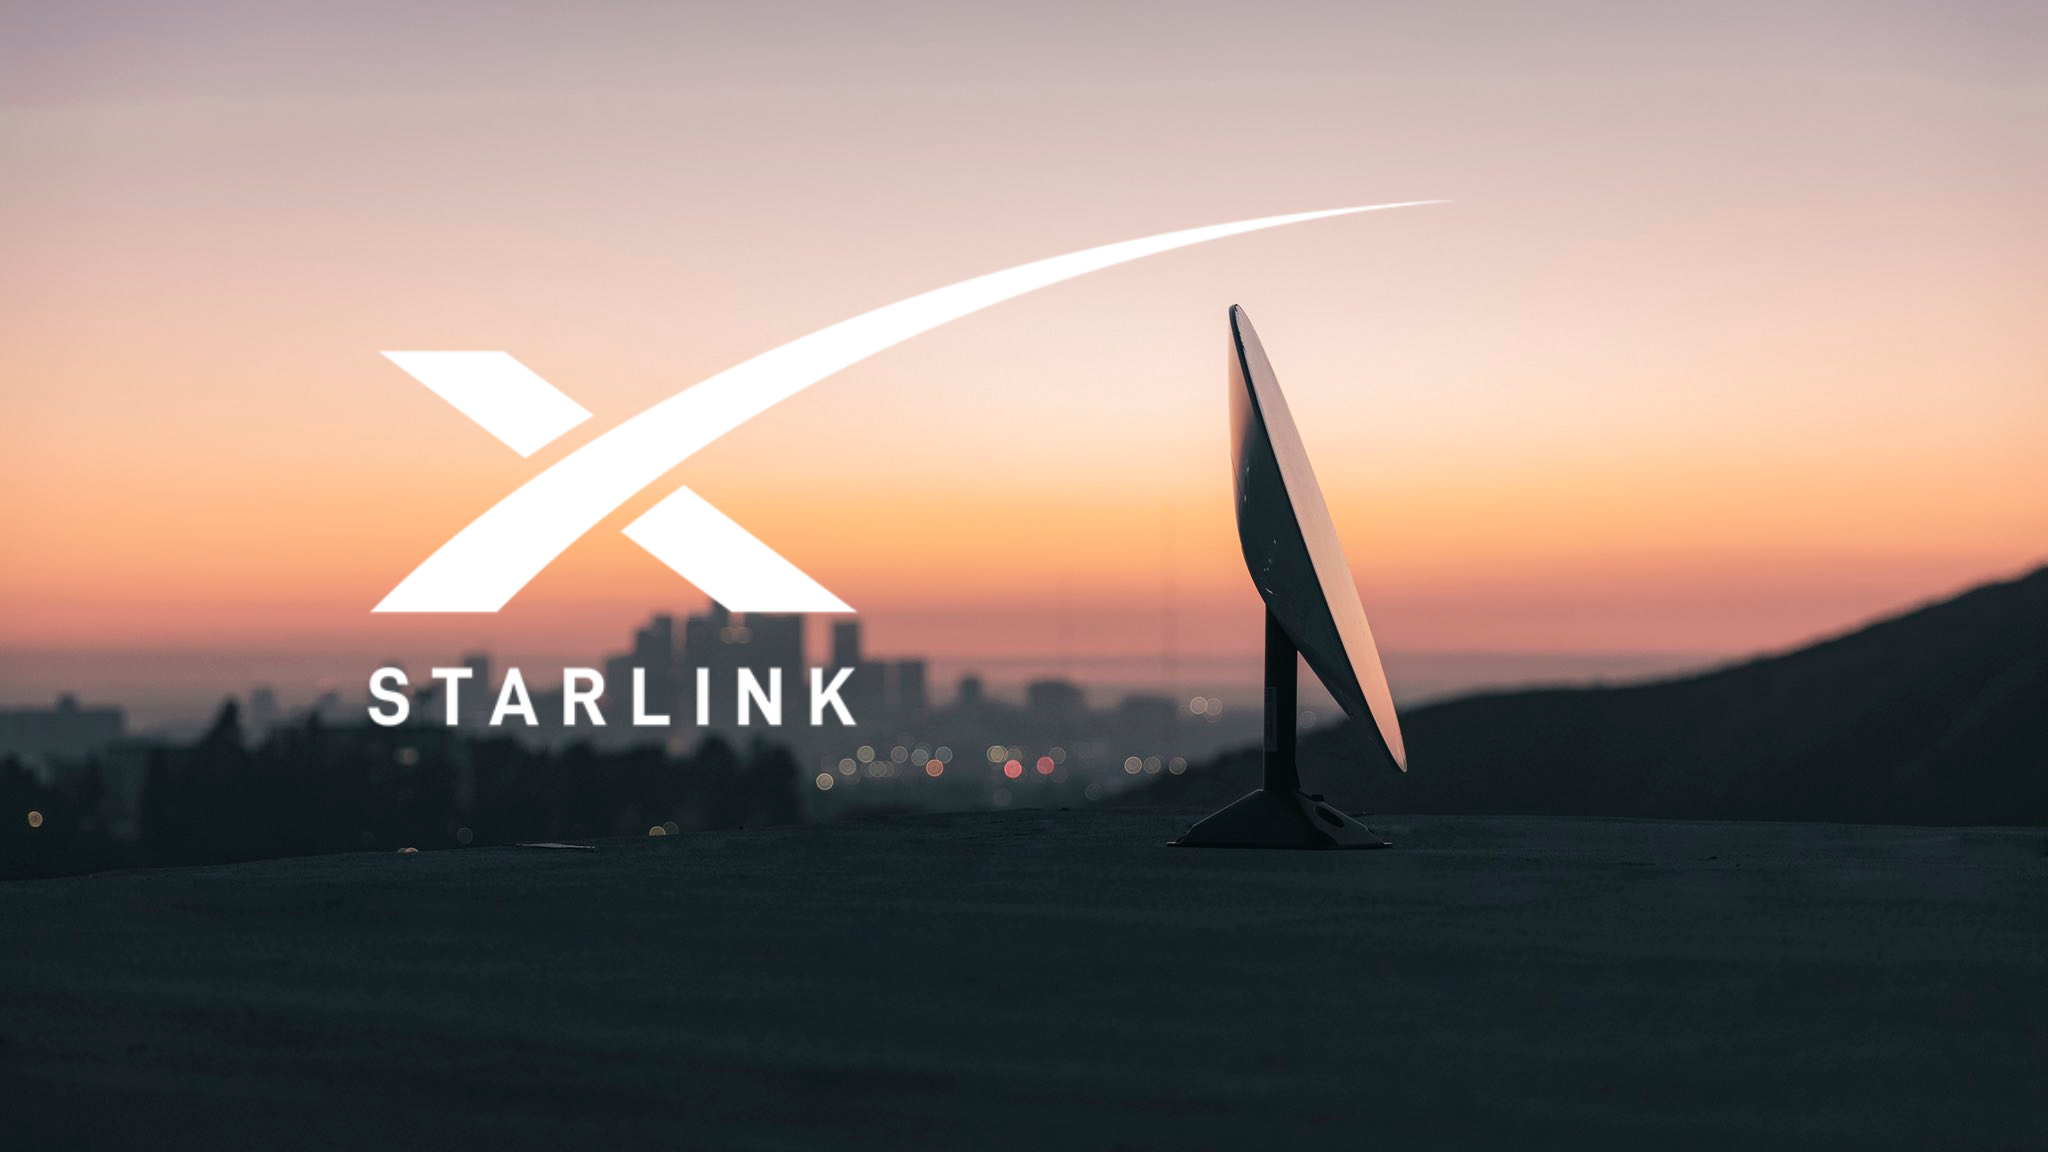 The Federation of Northern Ontario Municipalities supports access to SpaceX Starlink internet in Canada